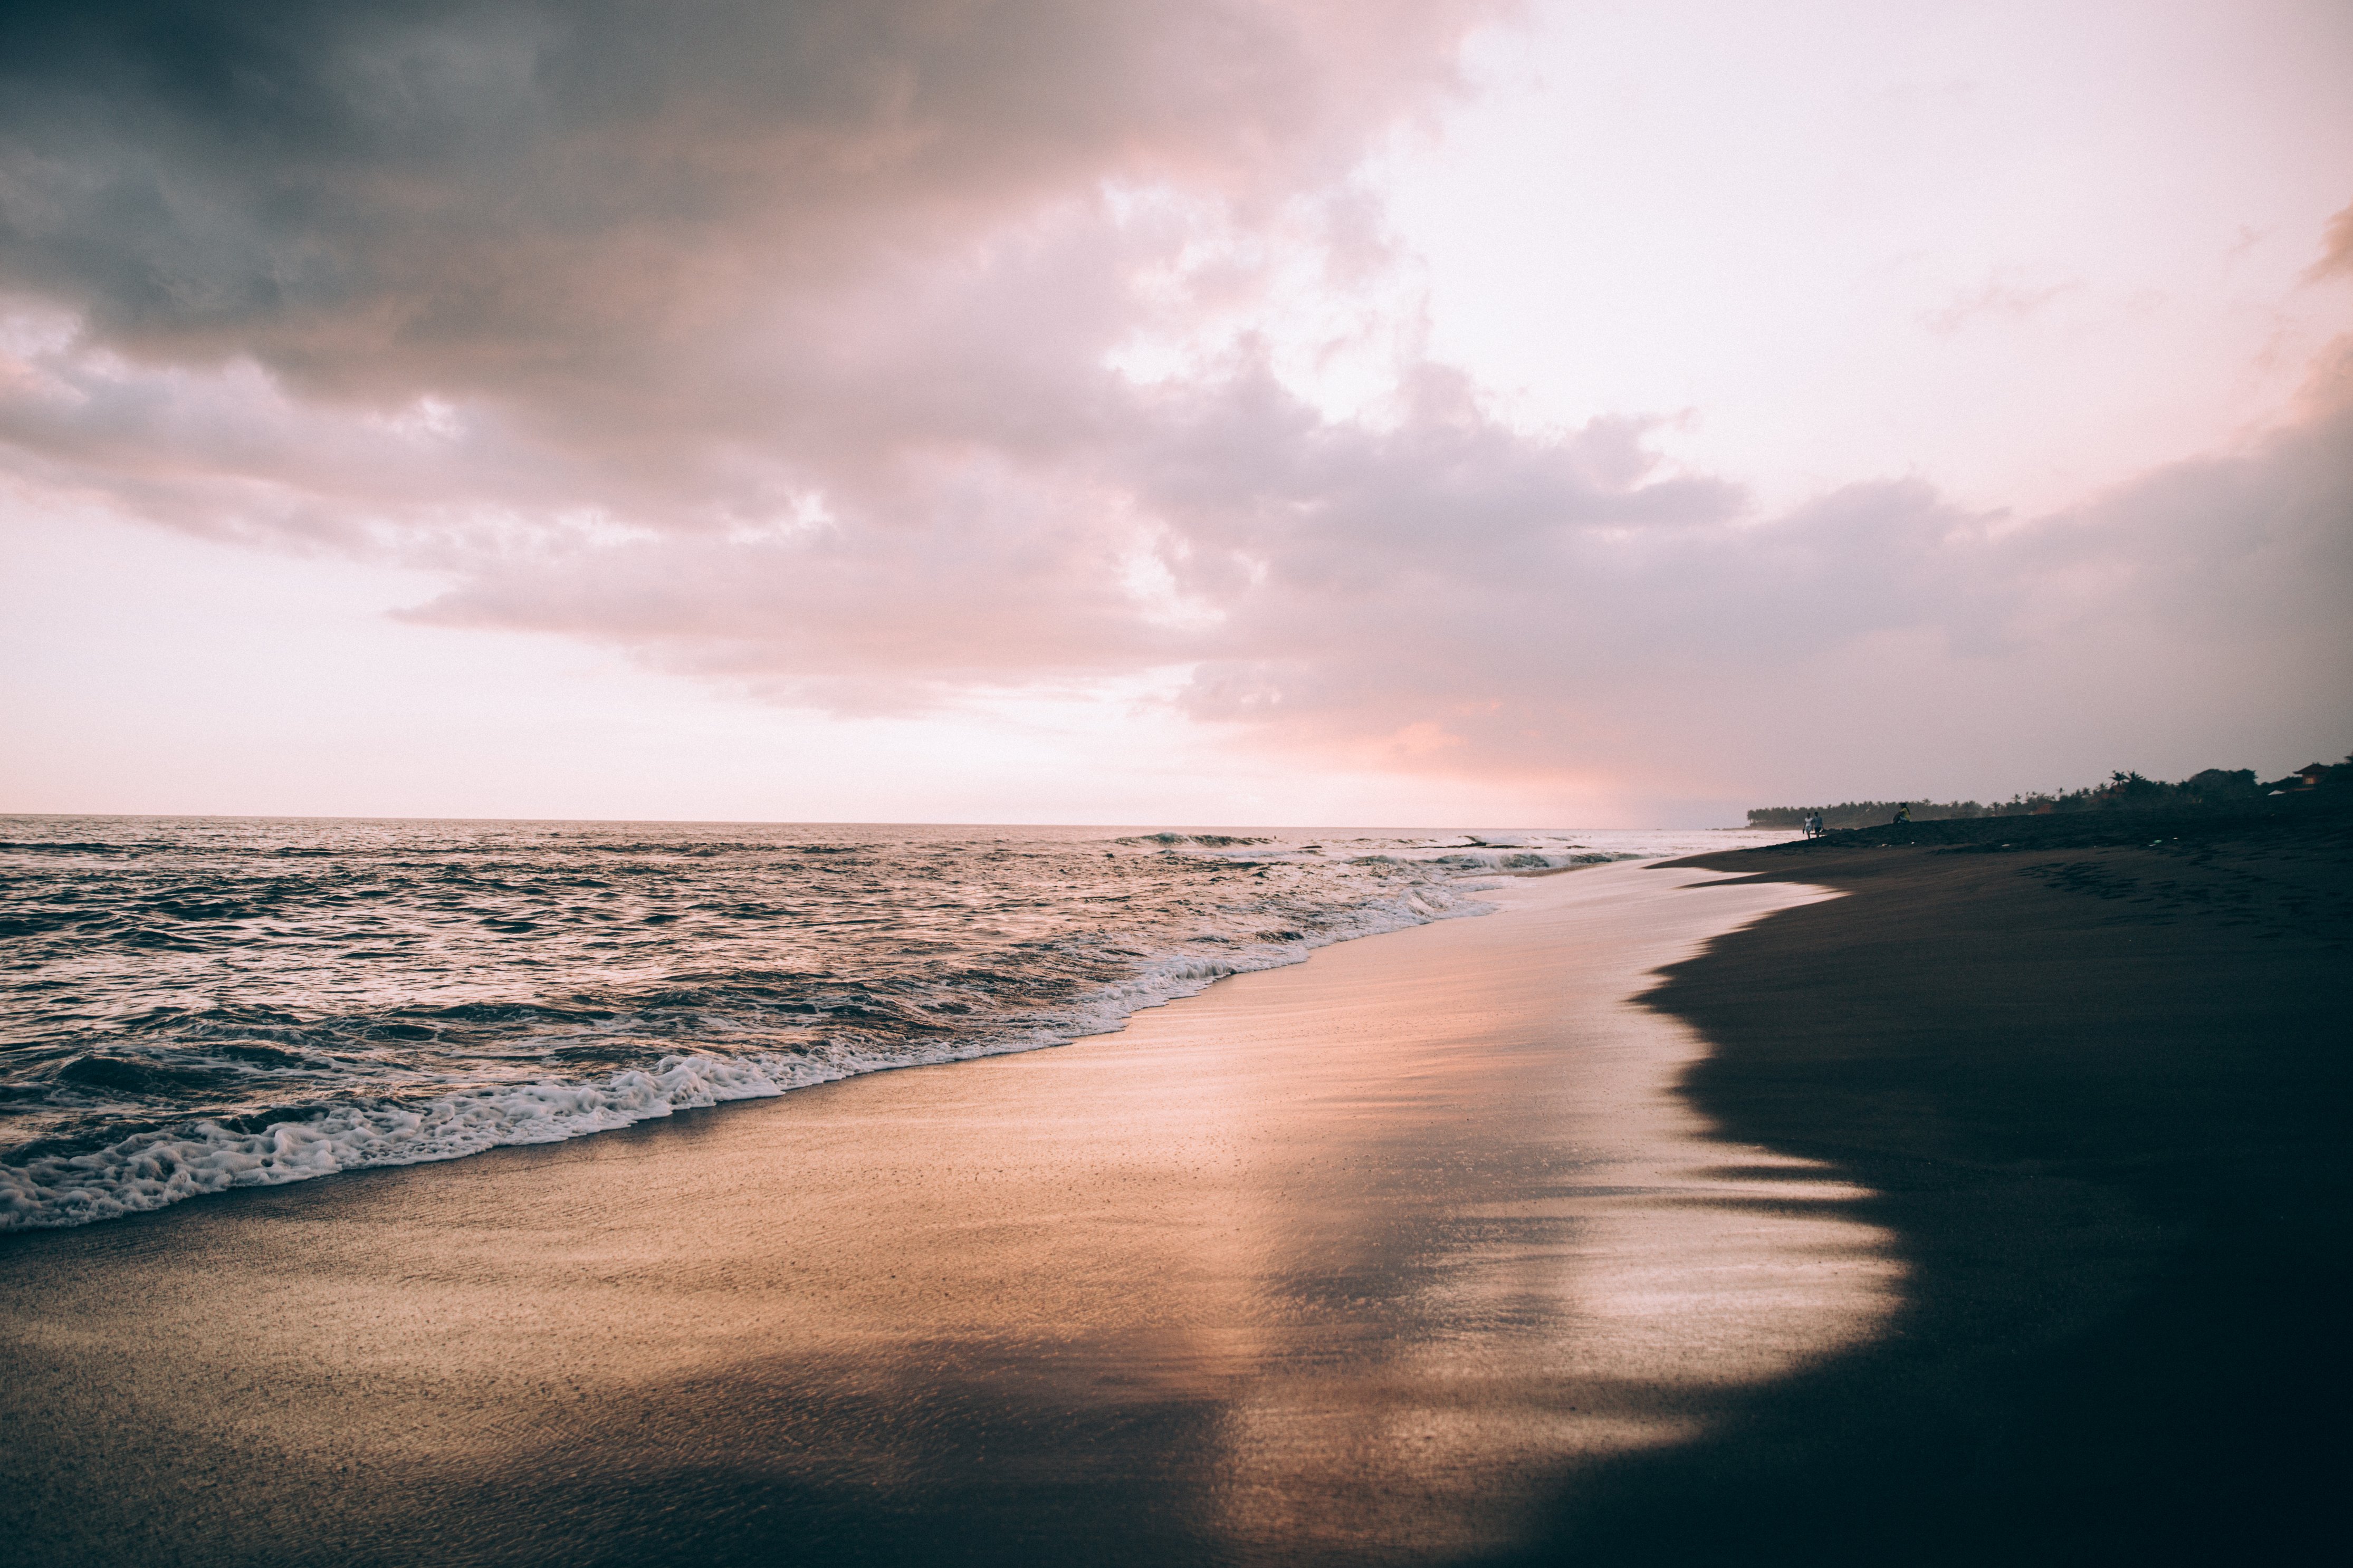 https://negativespace.co/wp-content/uploads/2019/11/negative-space-clouds-in-a-pink-sky-over-wave-soaked-beach.jpg